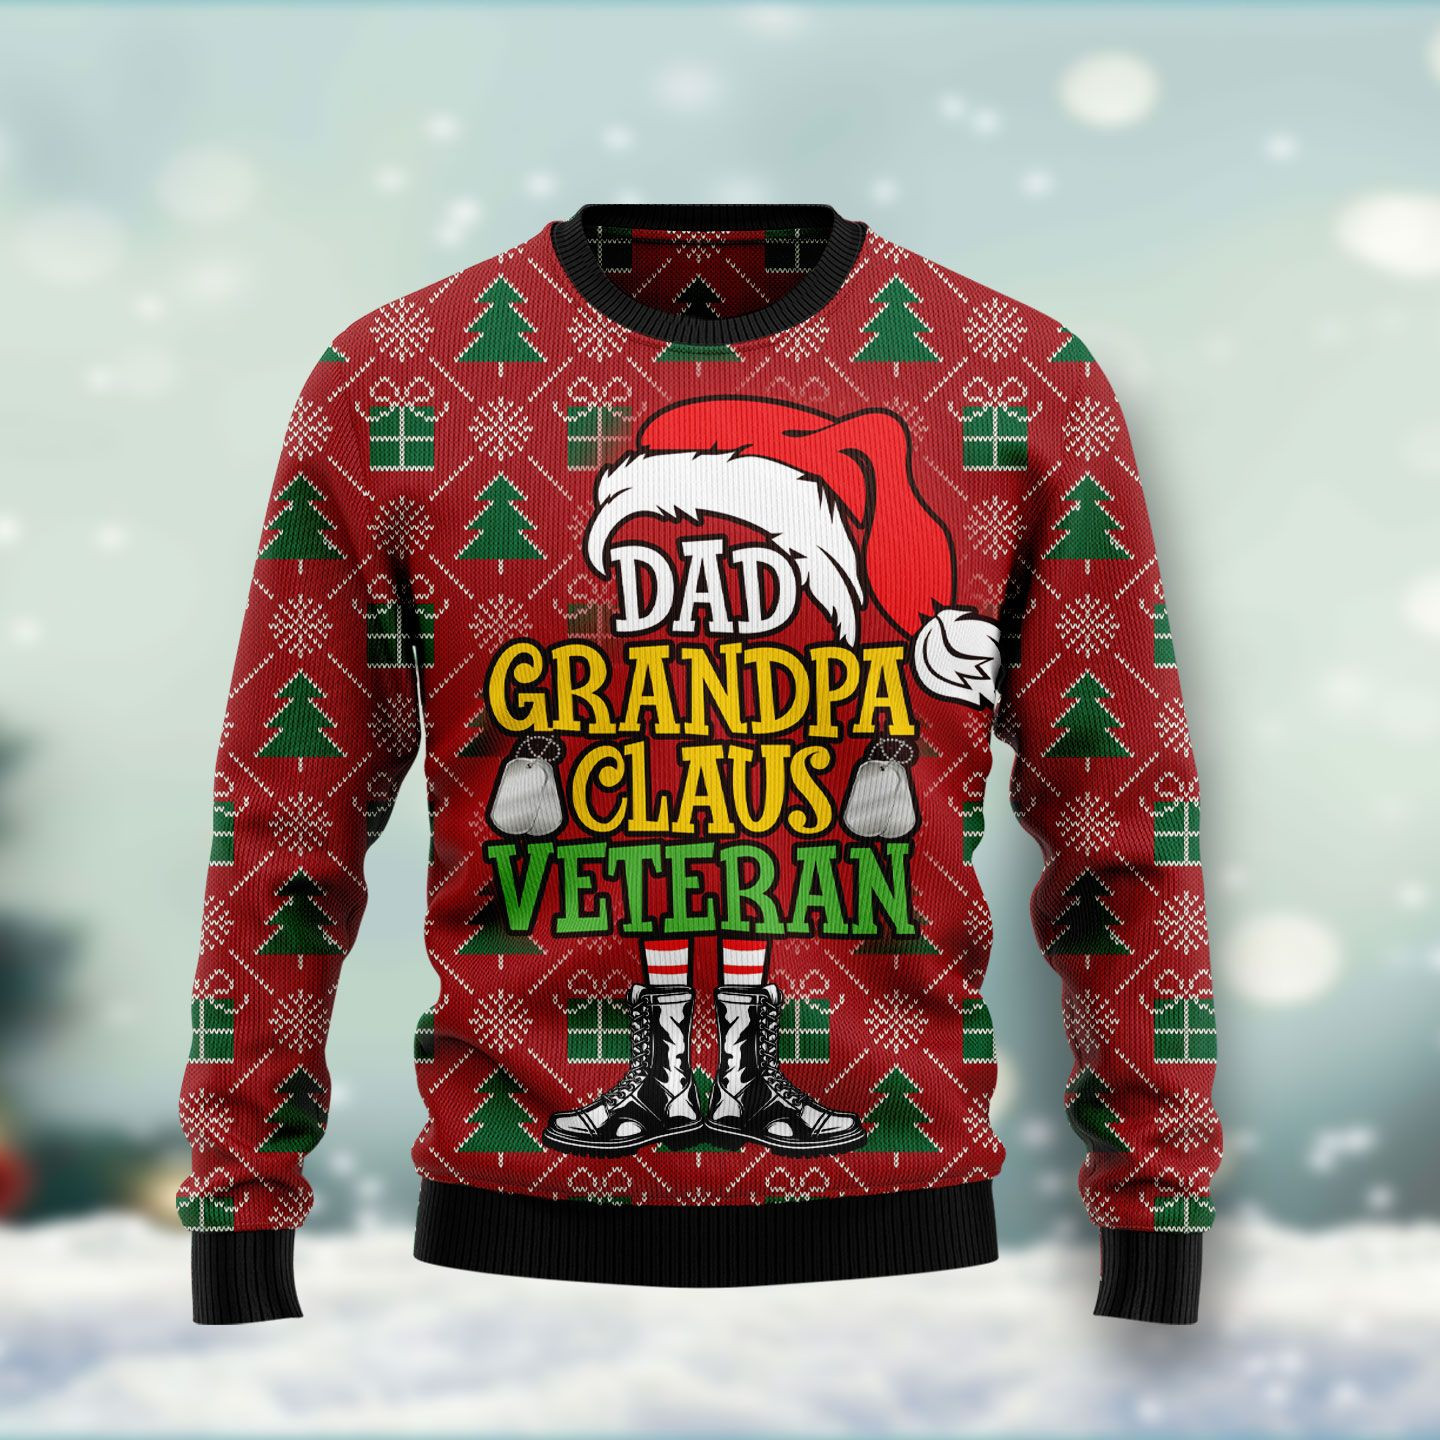 Dad Grandpa Claus Veteran Ugly Christmas Sweater Ugly Sweater For Men Women